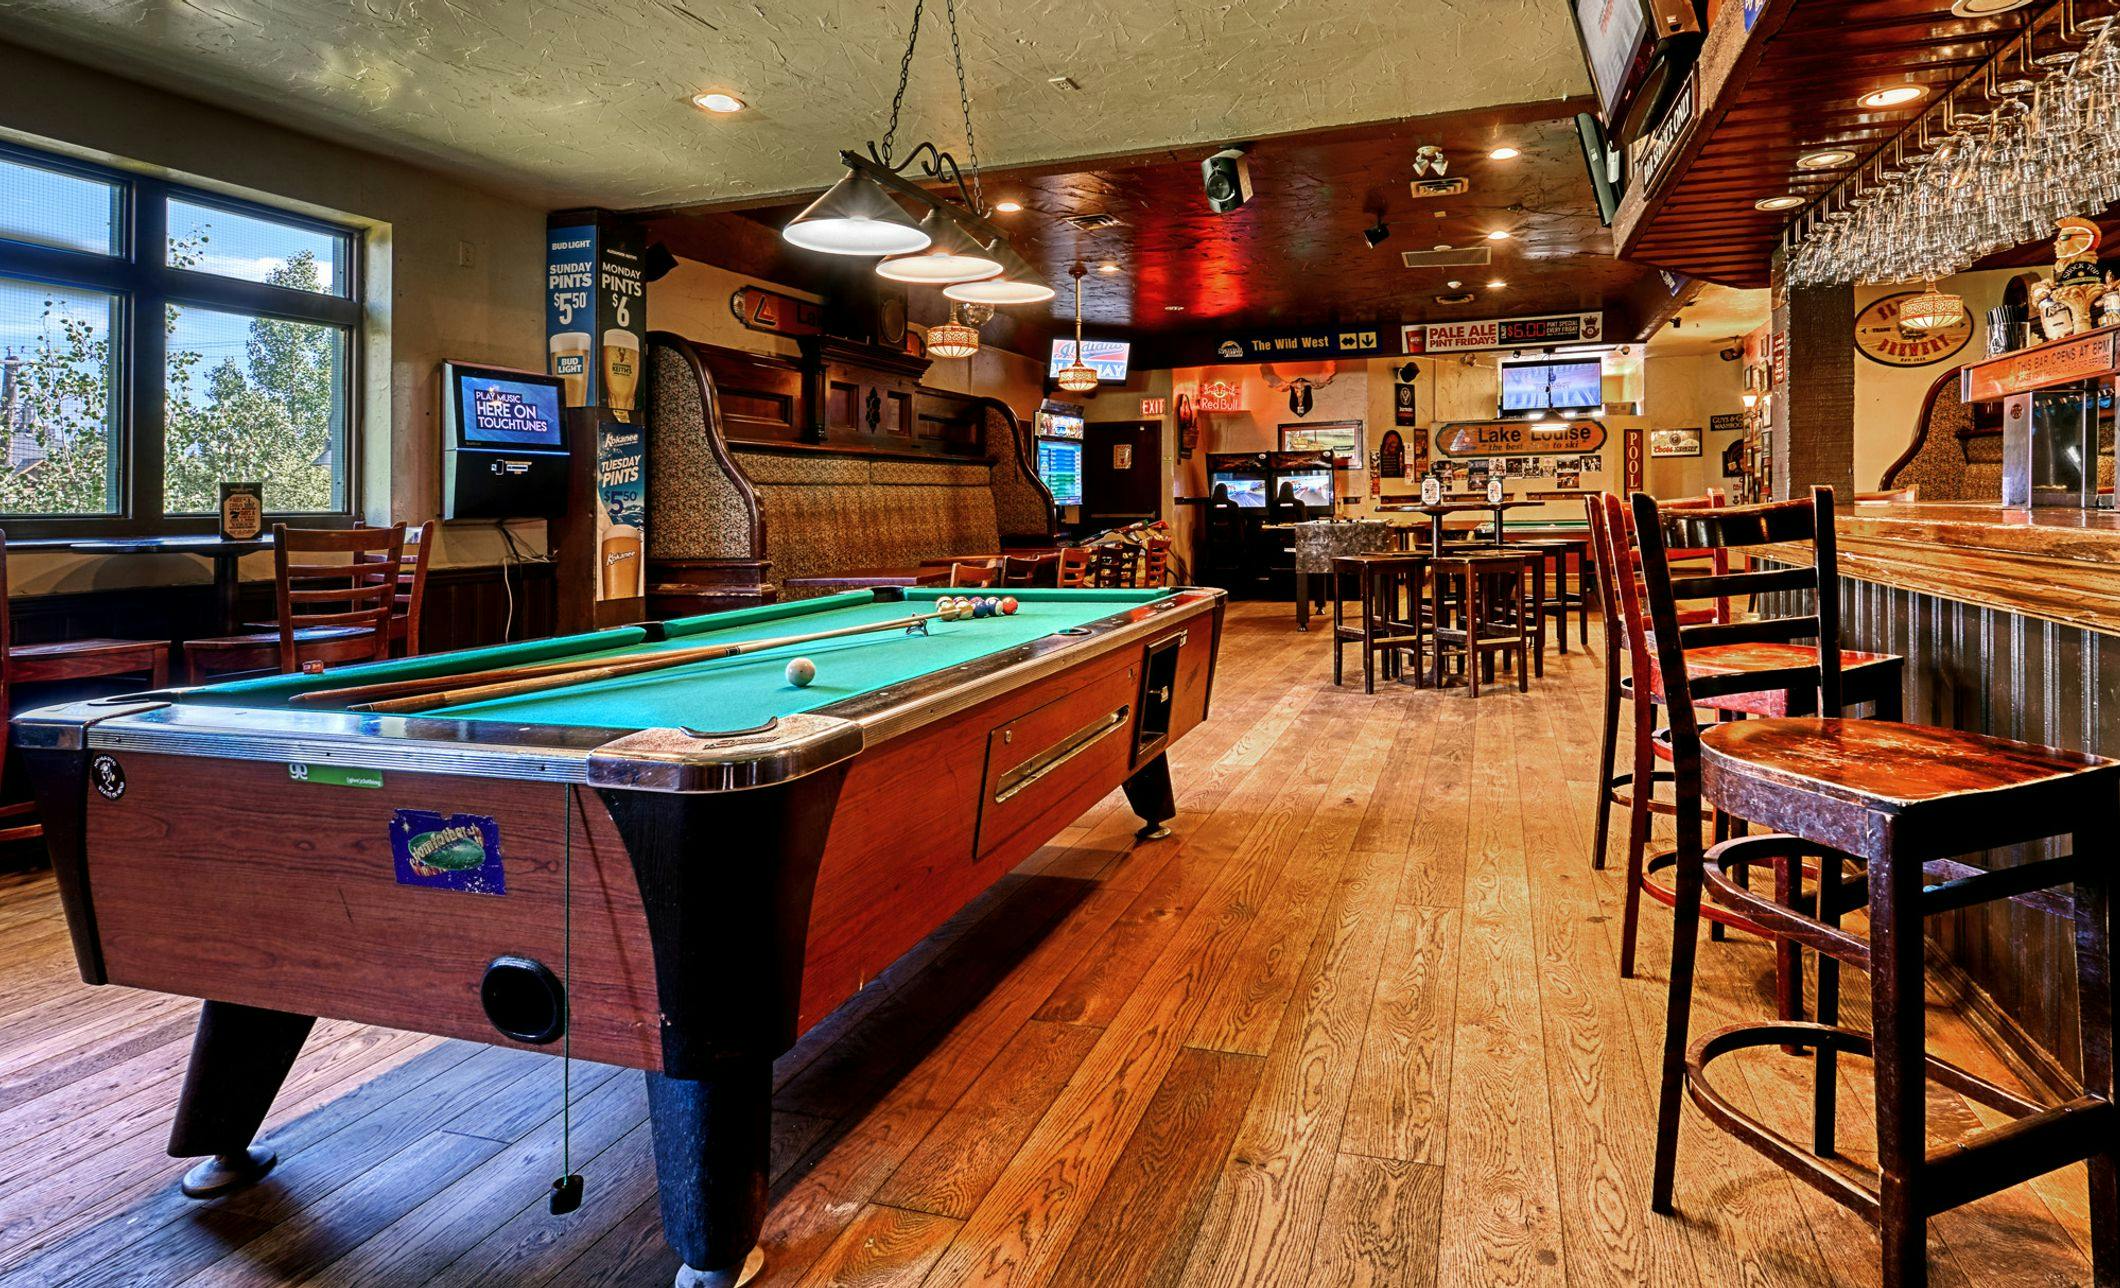 A pub interior including tables, a bar, and a pool table